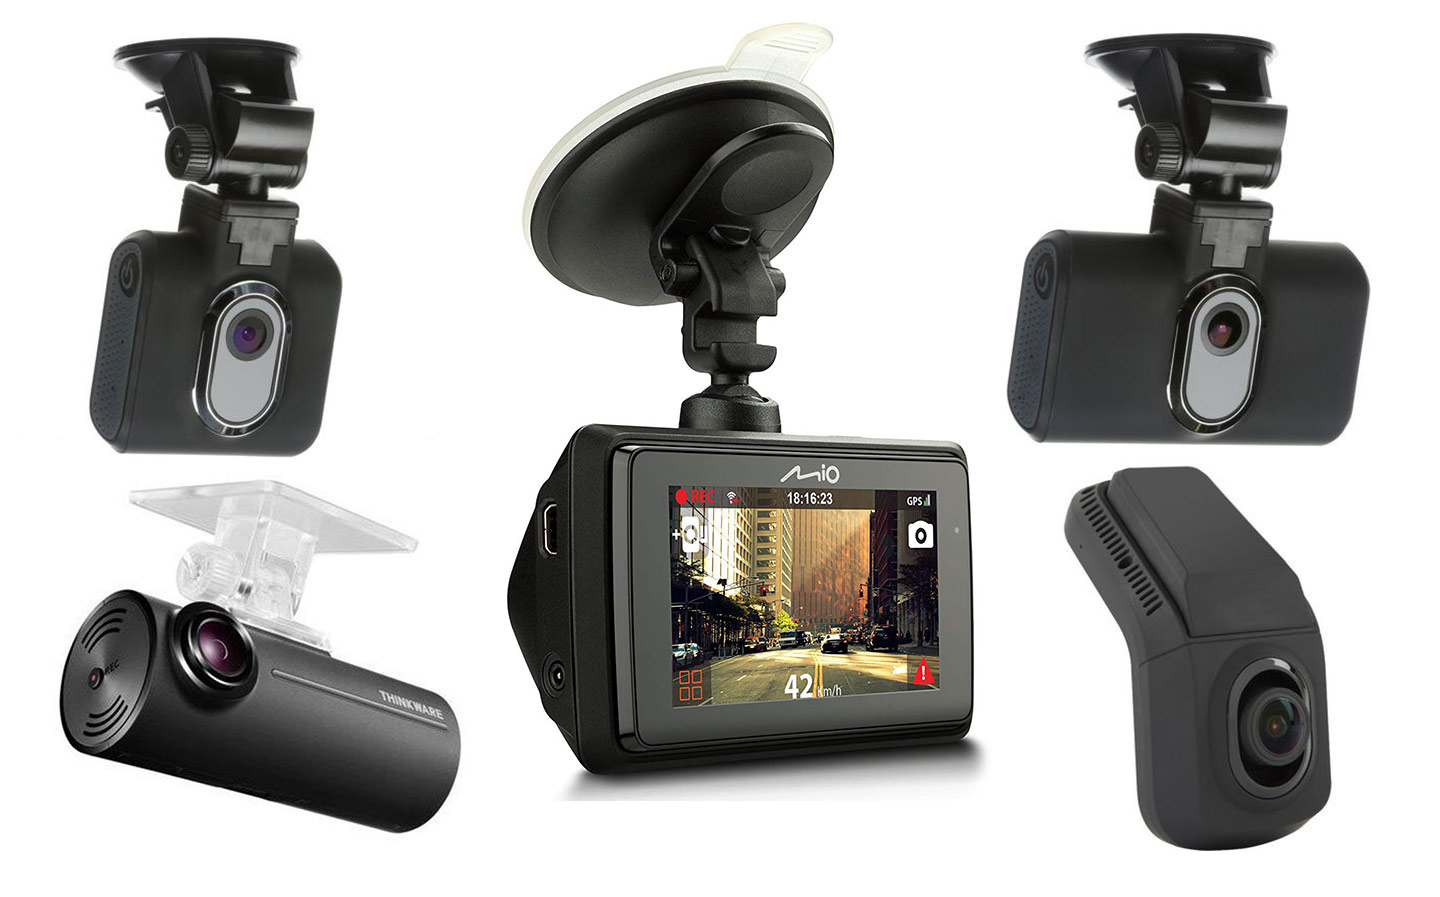 Buying Guide: Leading dash cam dashboard cameras reviewed (updated)